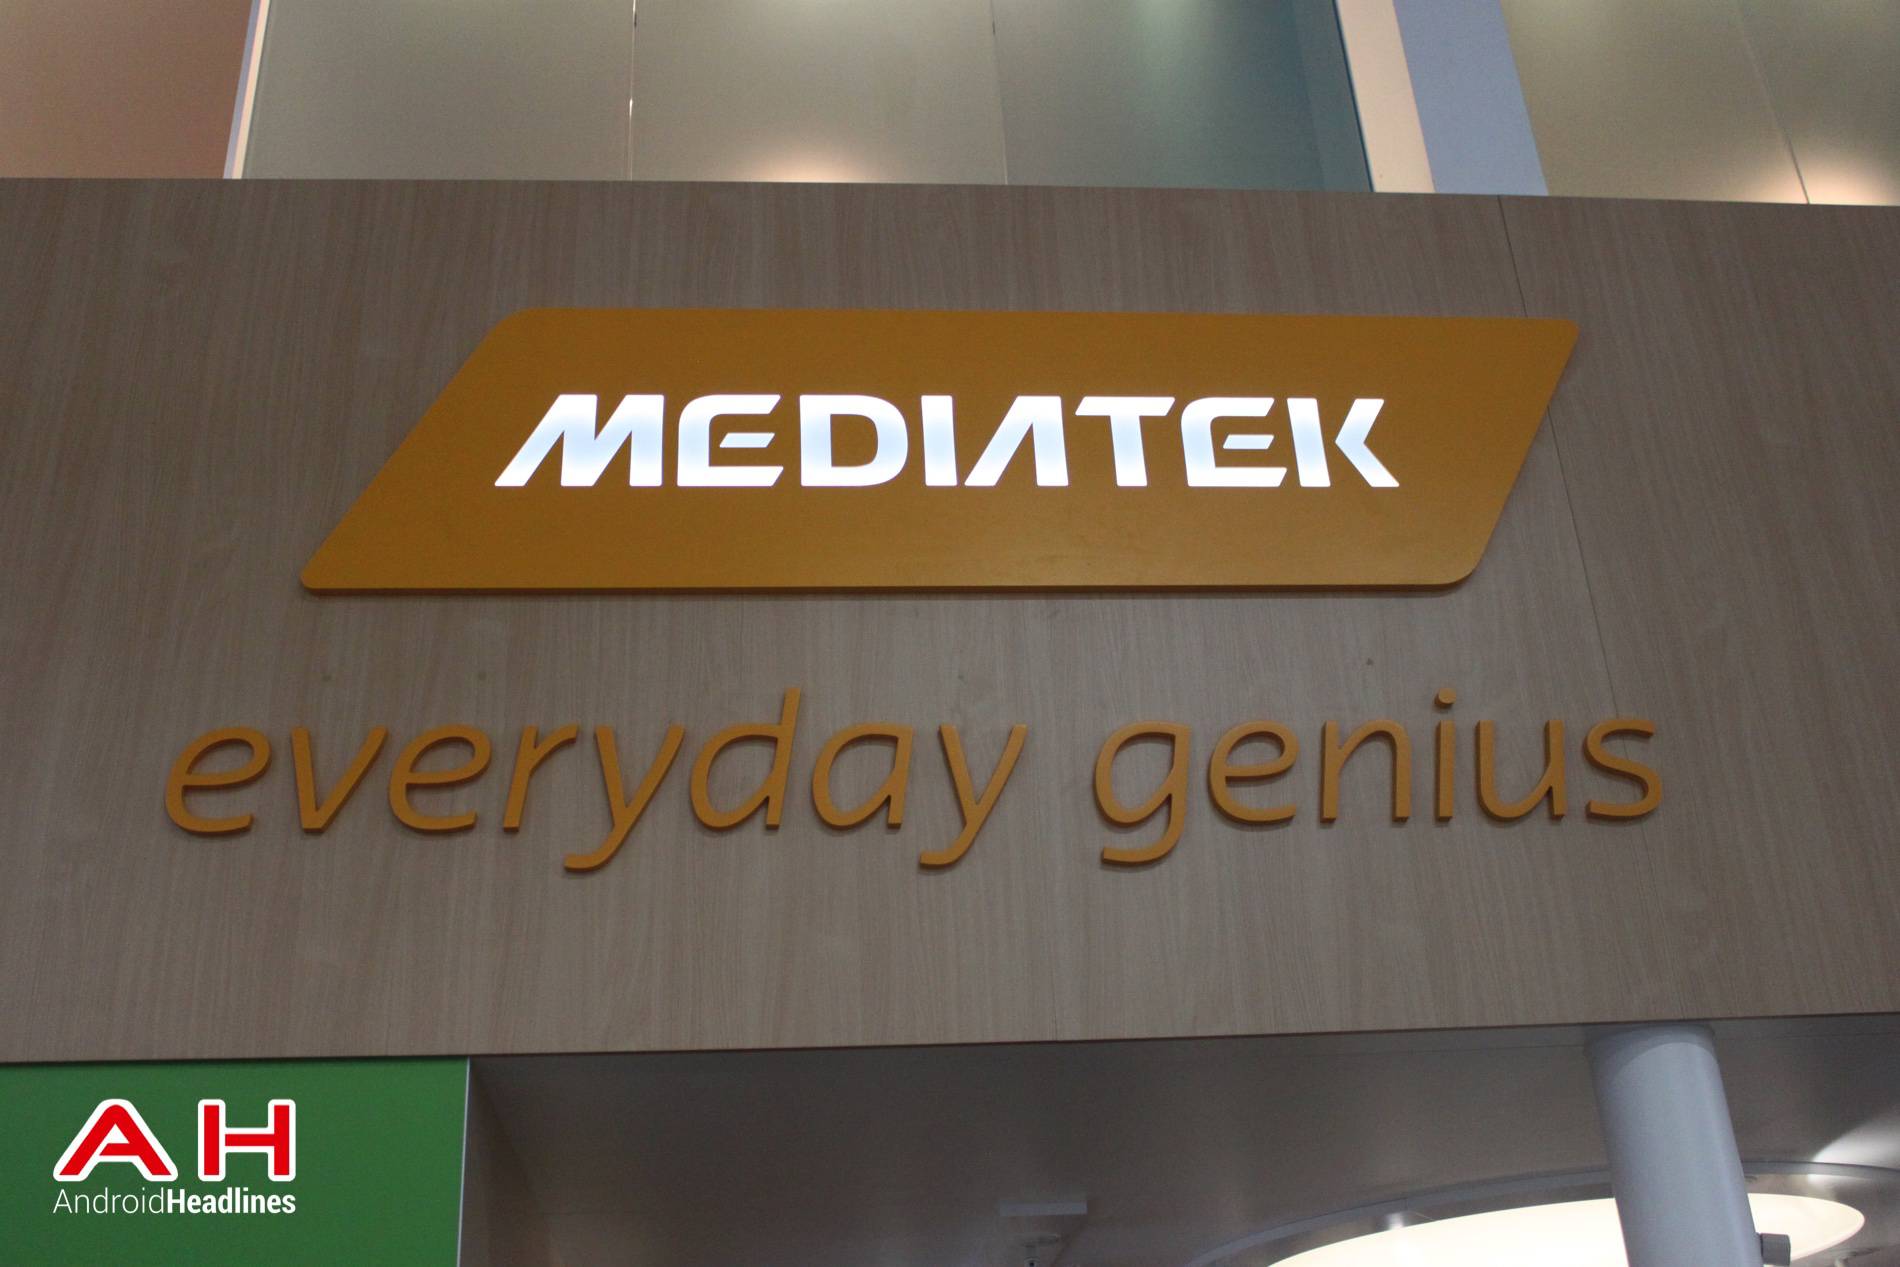 MediaTek Logo - MediaTek's Q 2016 Revenues Likely To Fall Sequentially. Android